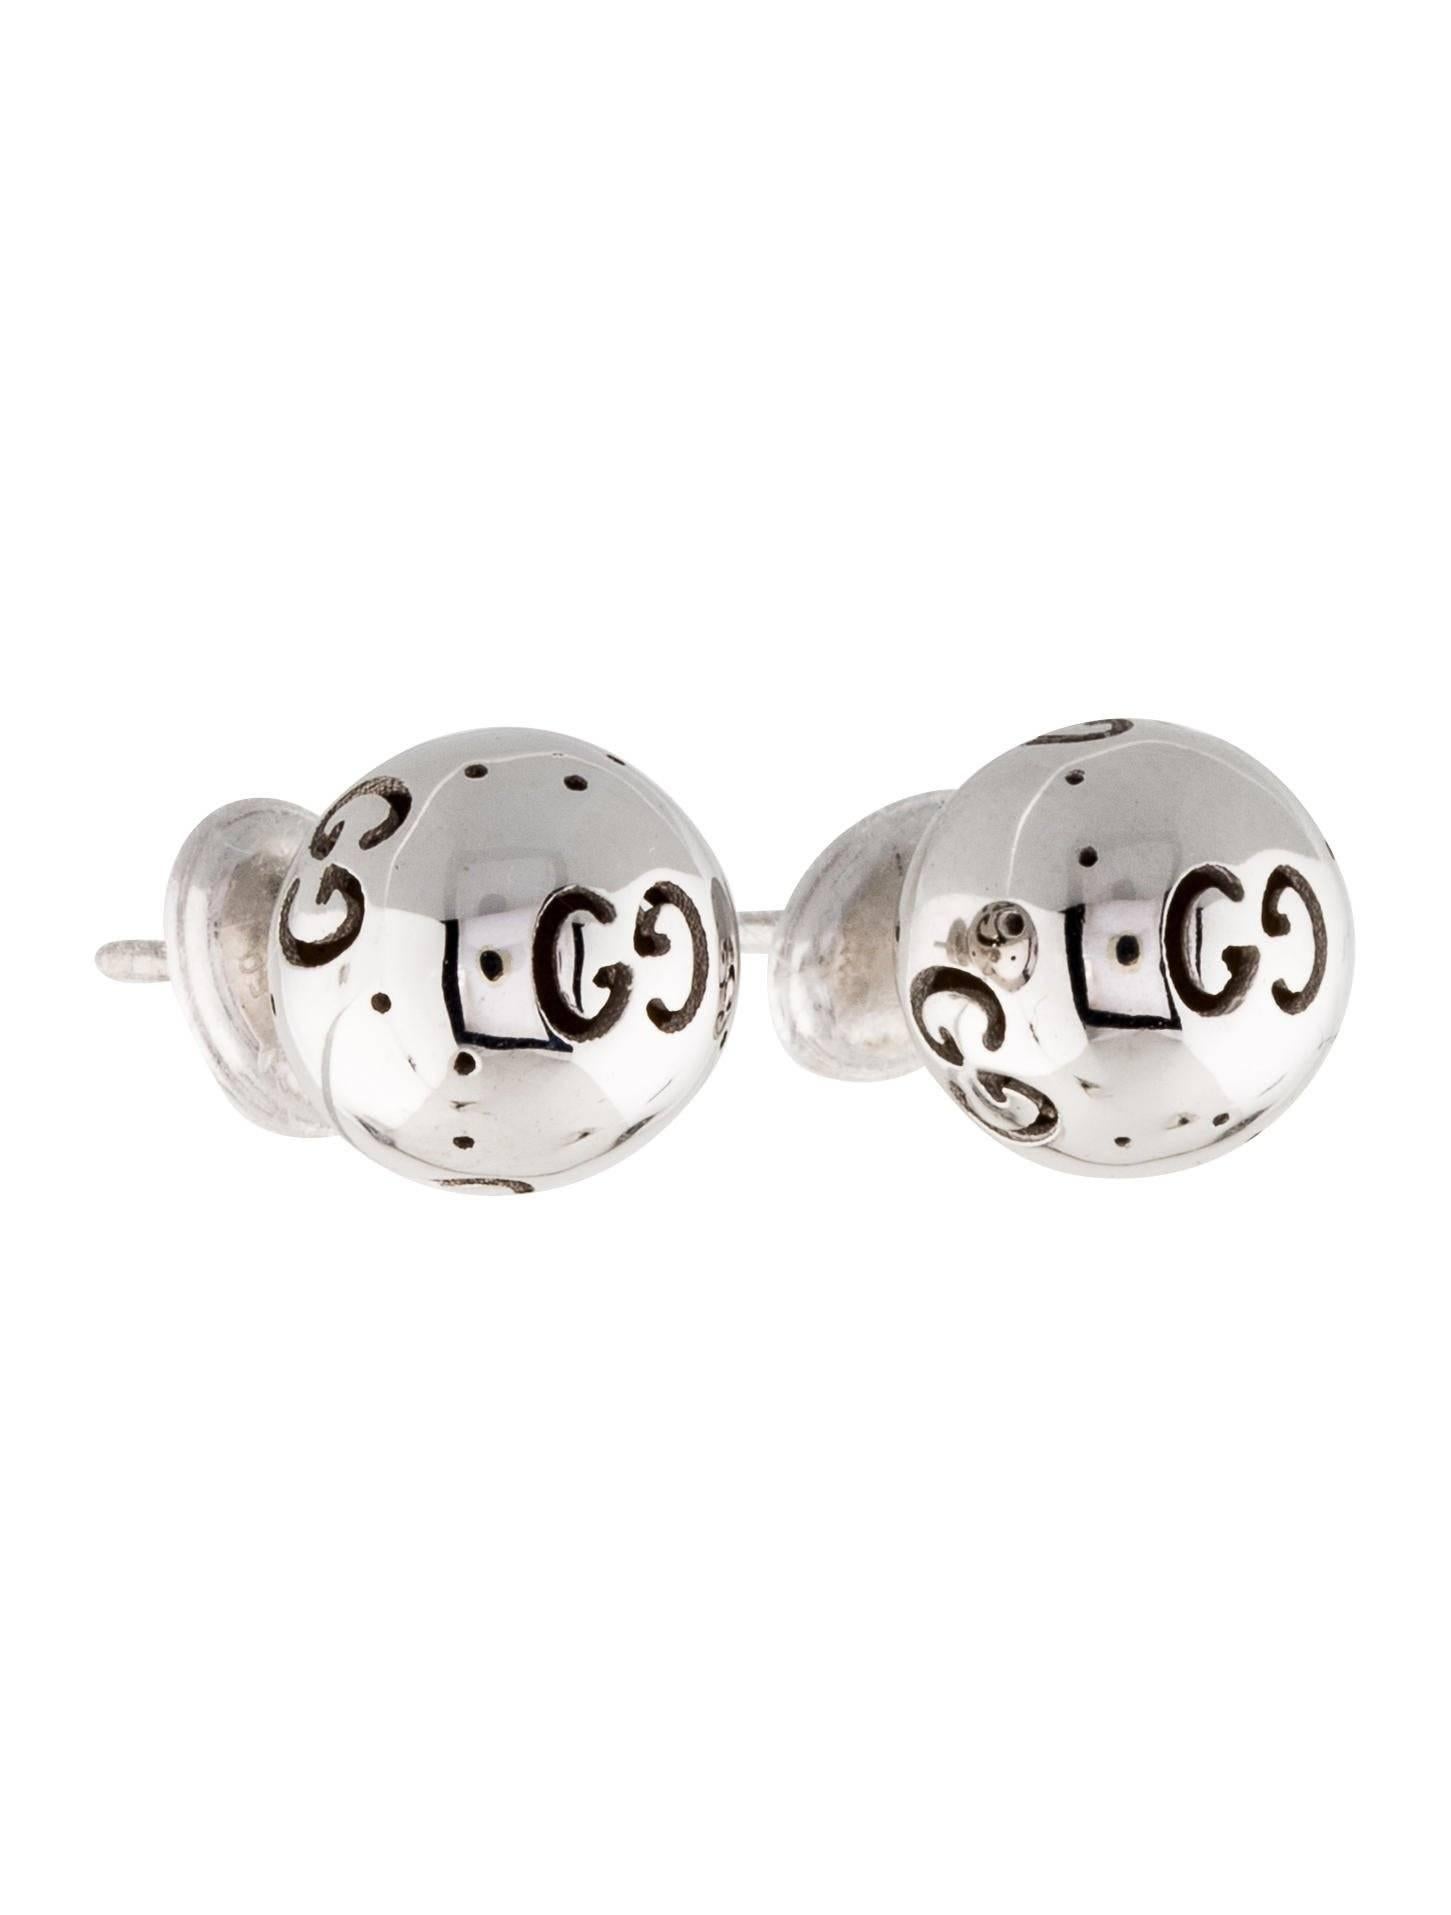 Gucci 18K White Gold Black GG Logo Charm Ball Stud Earrings in Box

18K White Gold - 750
Pierced clutch back closure
Signed
Made in Italy
Diameter 0.40